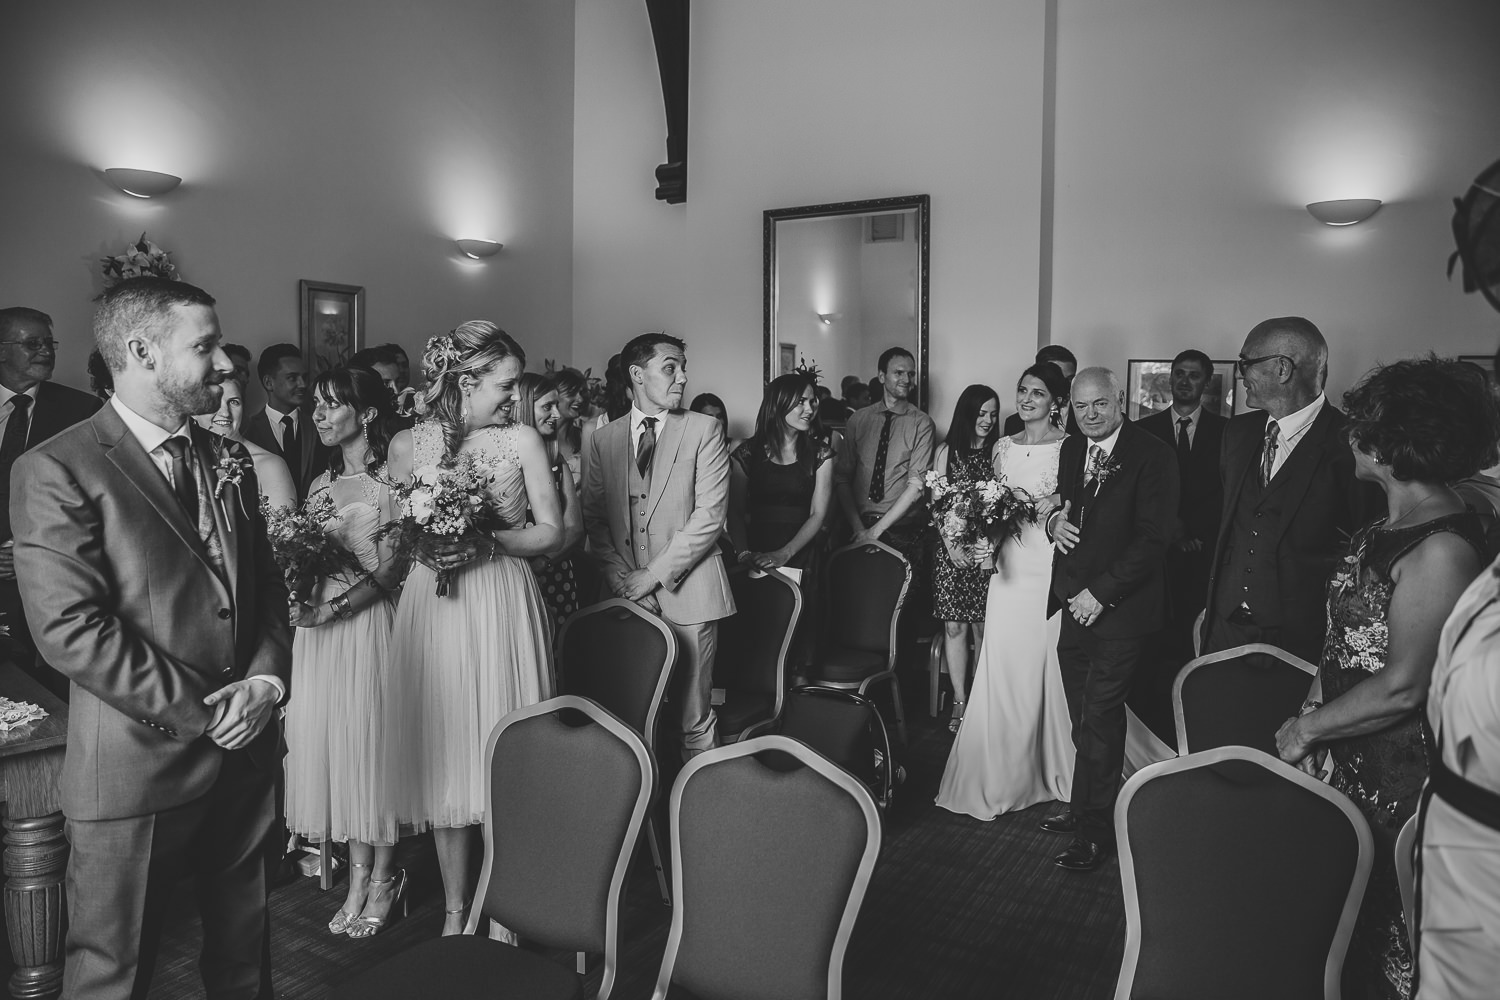 Bride walking down the aisle at Ely Registry office, being greeted by wedding guests and the groom. photographed by an Ely Wedding Photographer